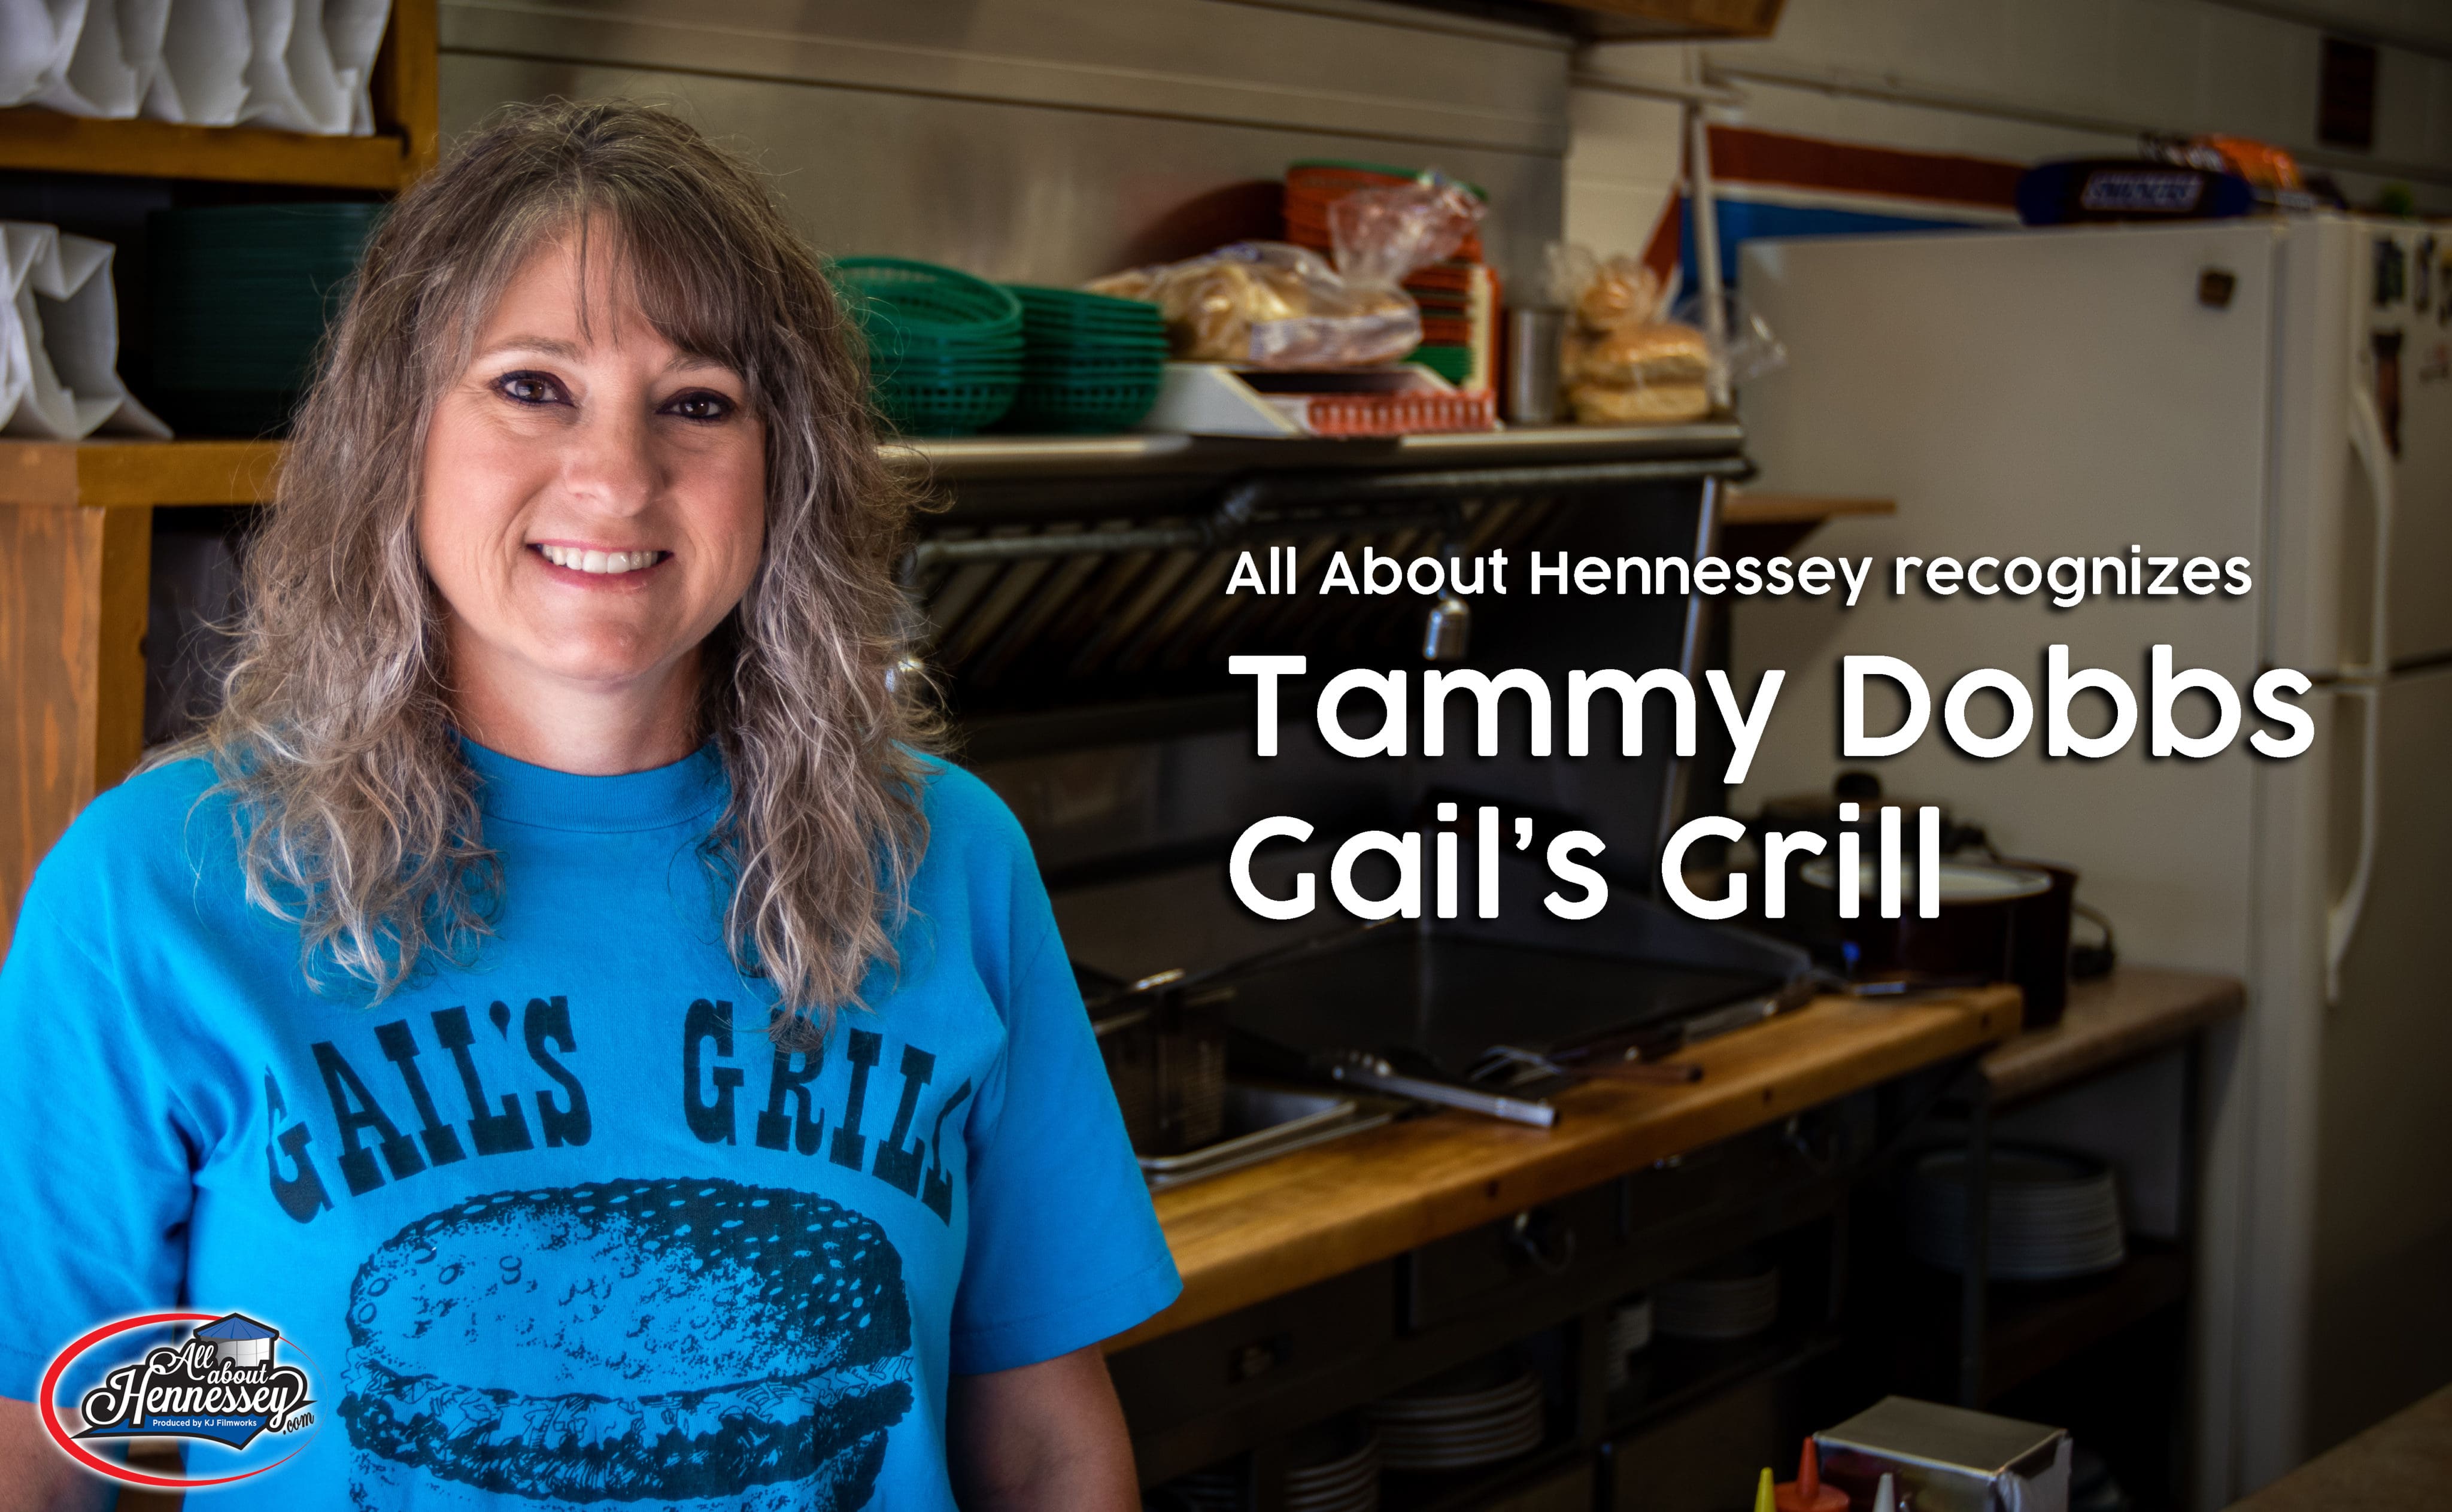 THIS WEEK ALL ABOUT HENNESSEY RECOGNIZES TAMMY DOBBS OF GAIL’S GRILL, AS OUR WOMEN IN BUSINESS.